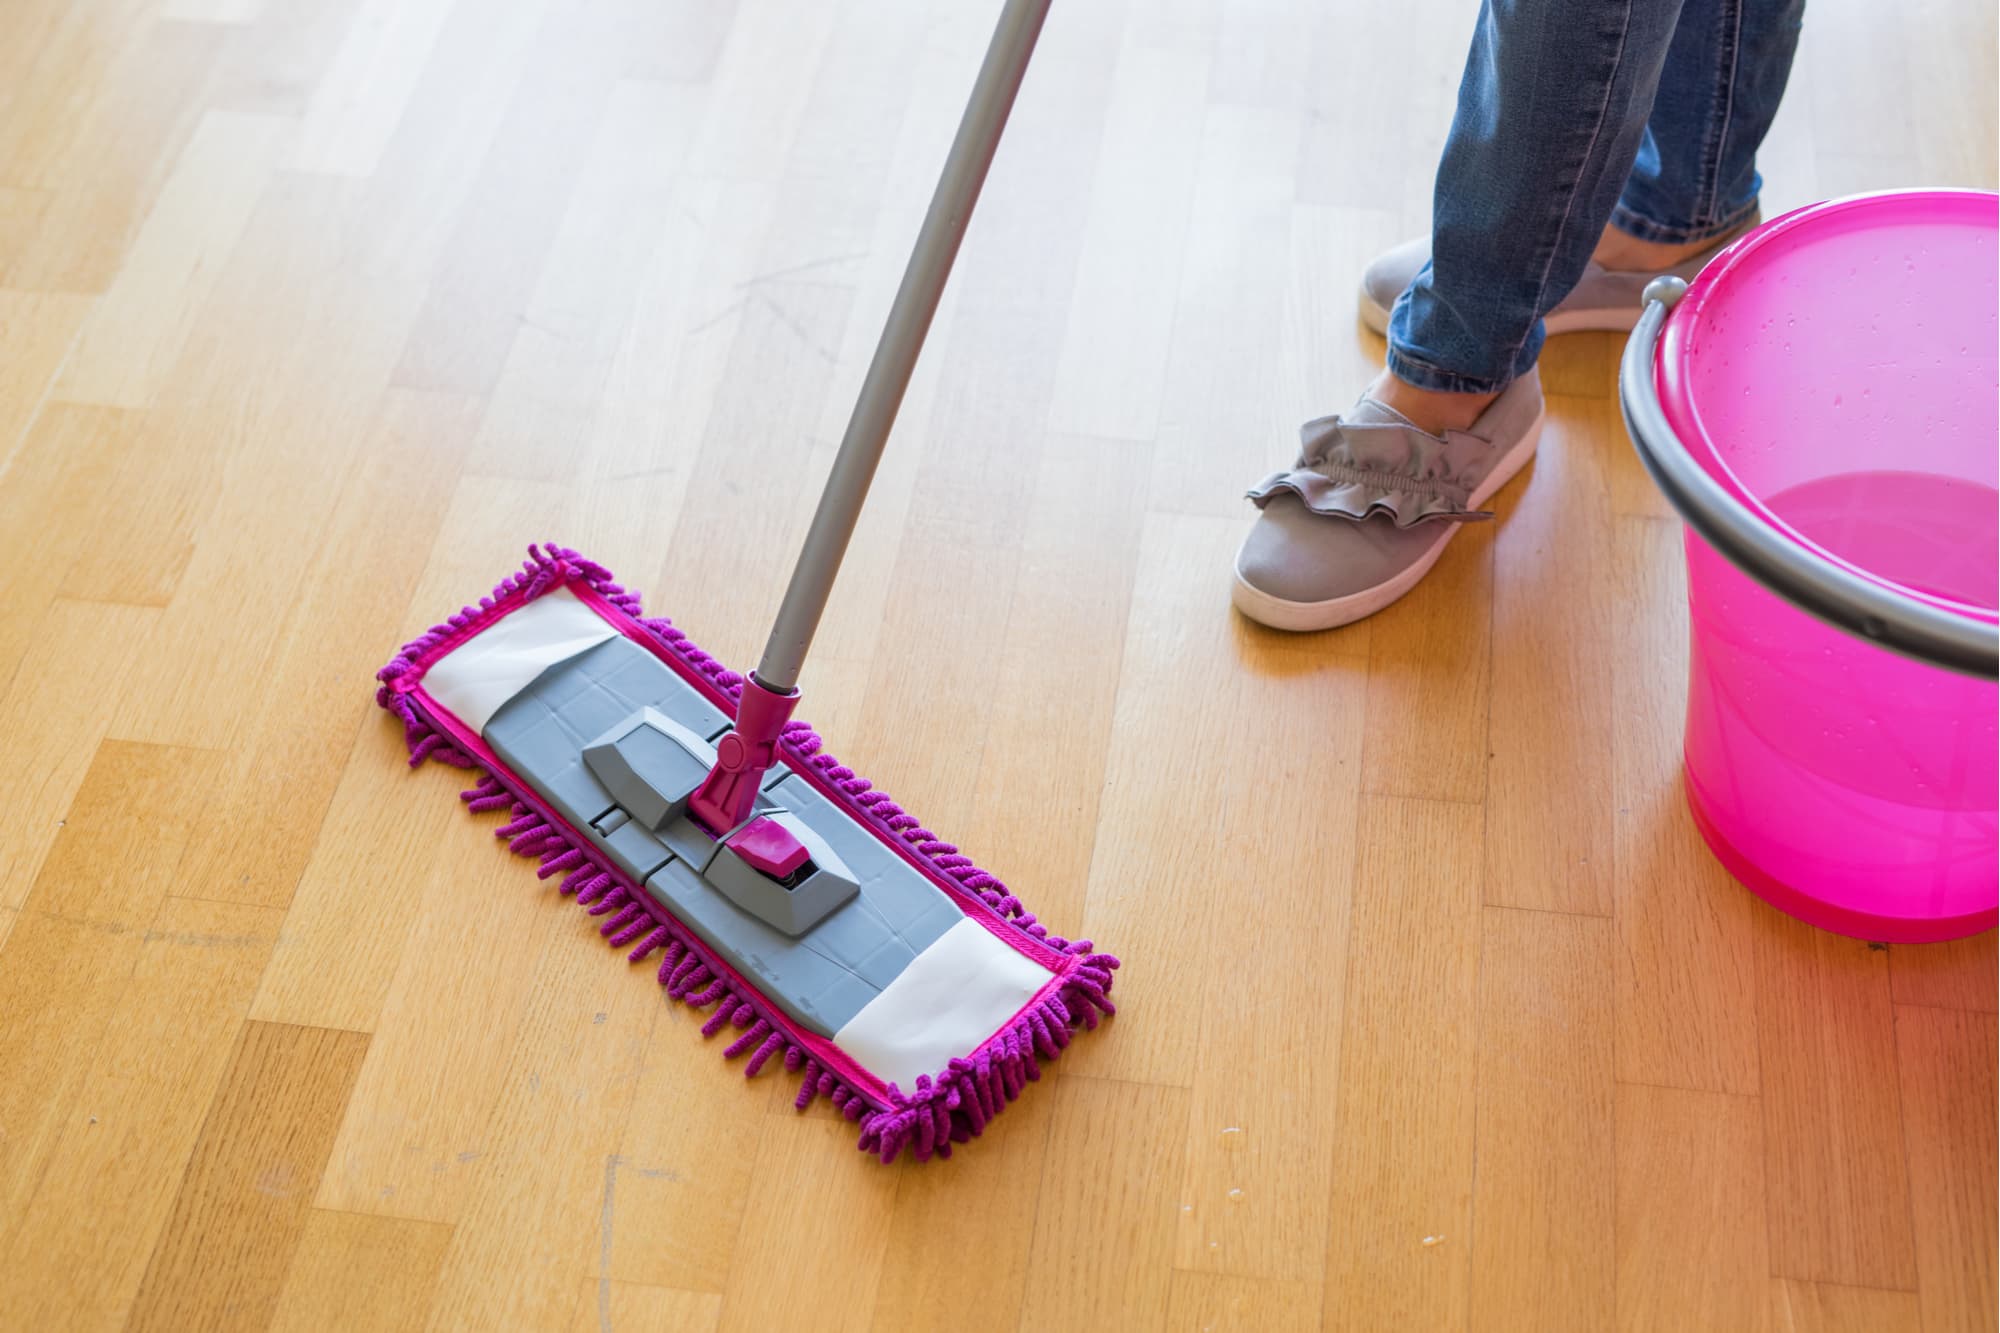 Floor Cleaning Liquid: The Ultimate Solution for Spotless Floors!